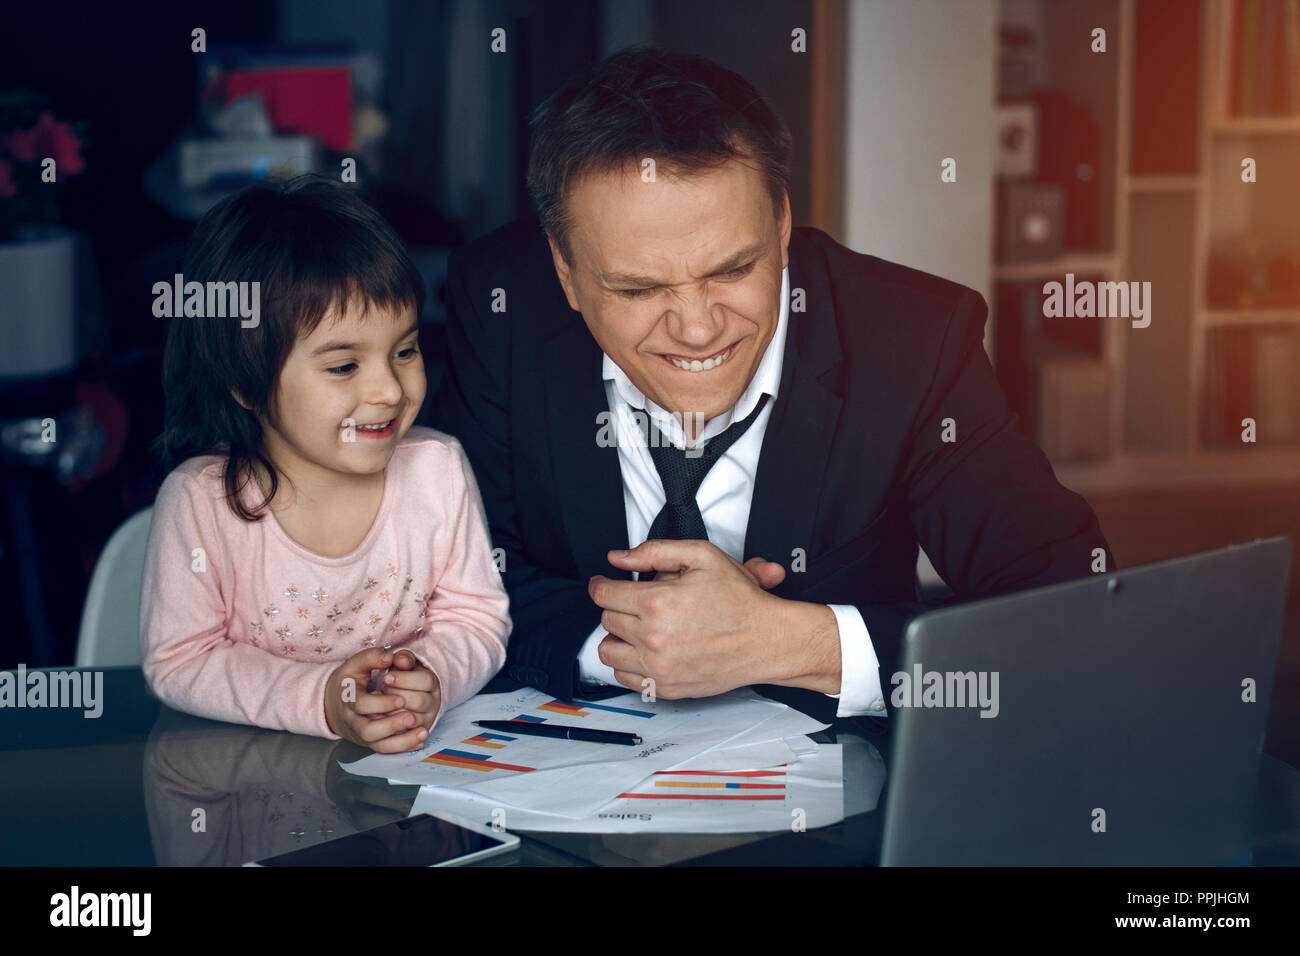 Daughter helping father working at home Stock Photo